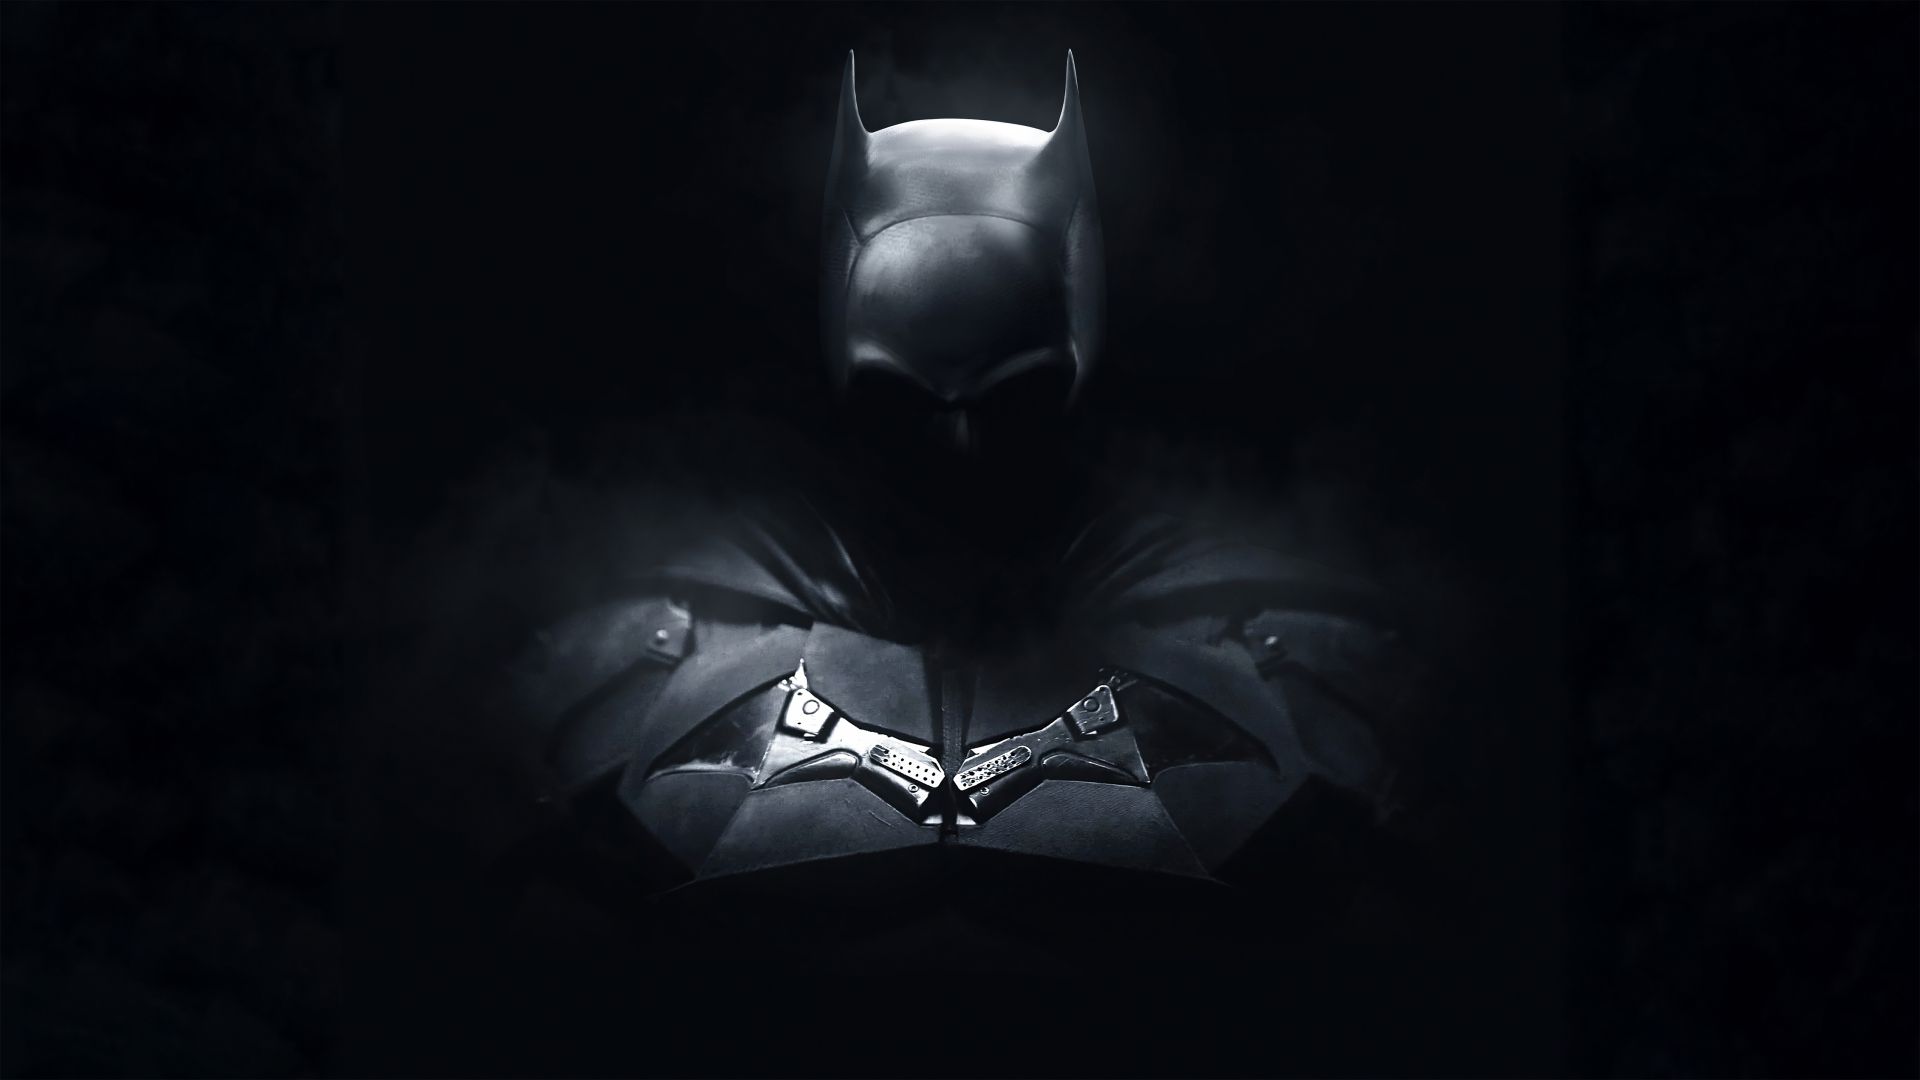 X the batman p laptop full hd wallpaper hd movies k wallpapers images photos and background